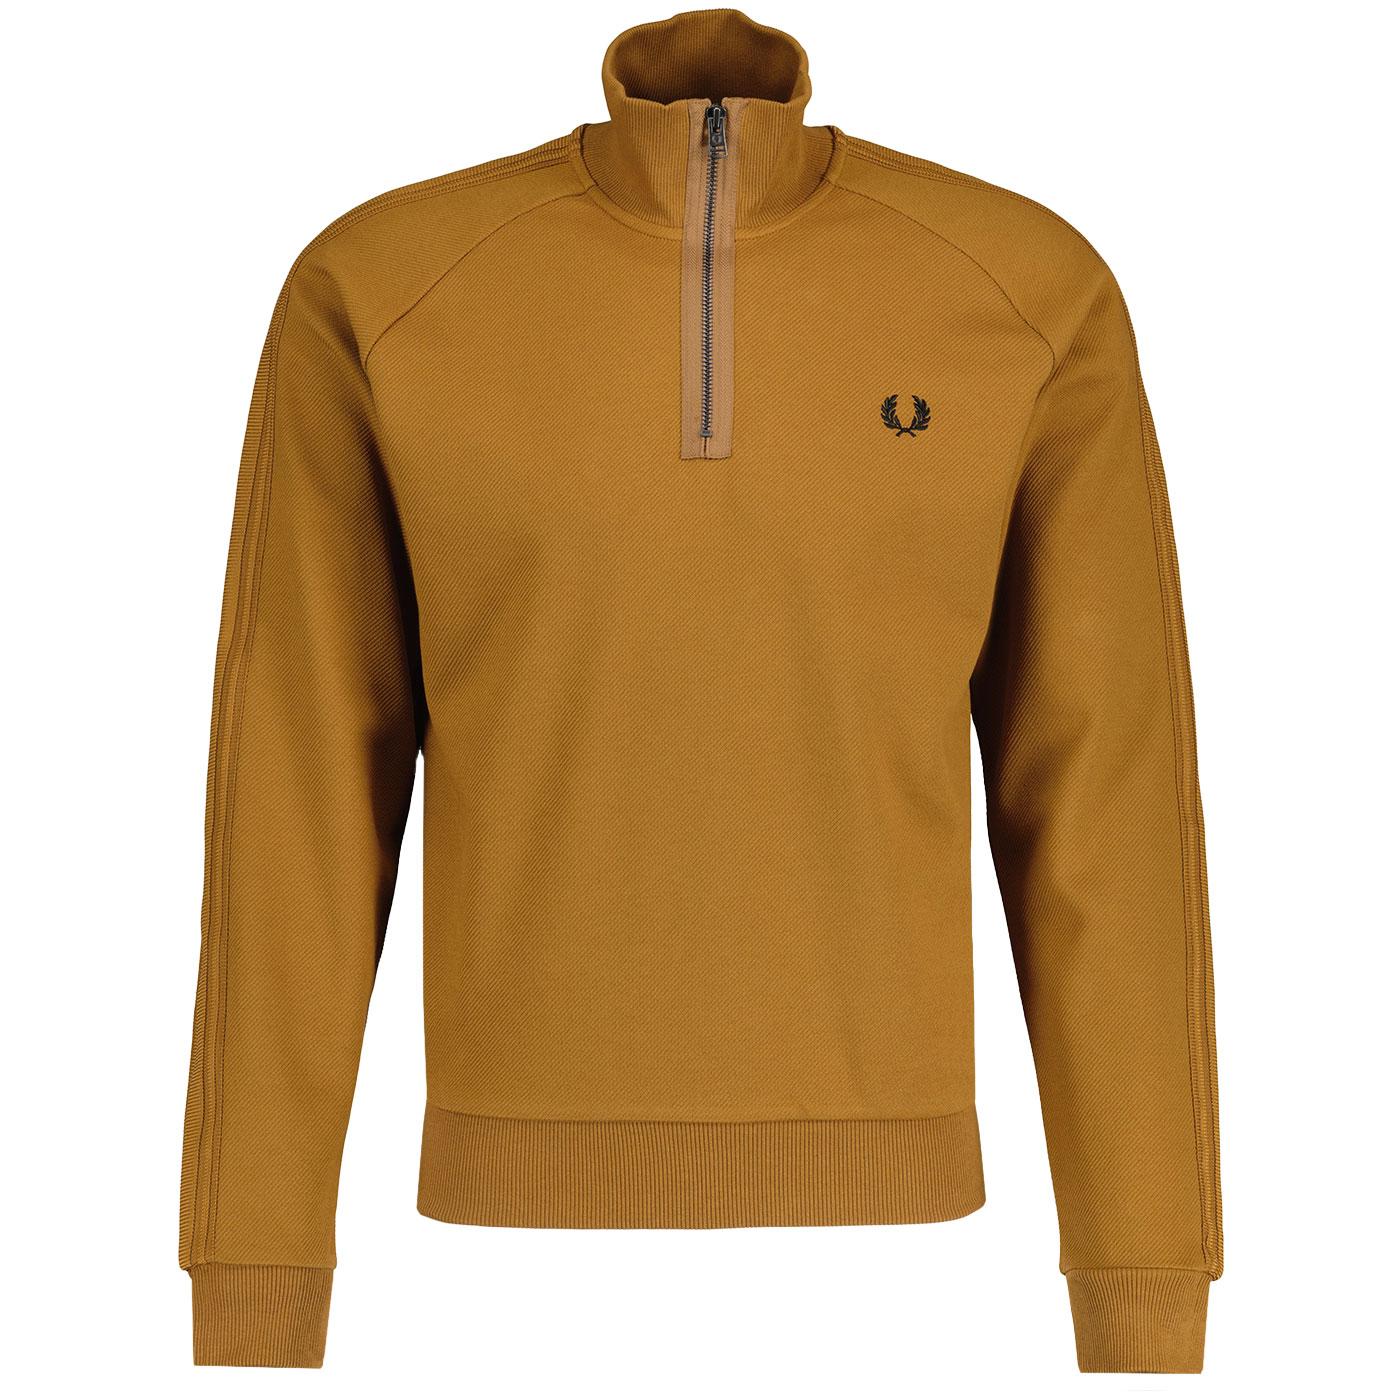 Fred Perry Retro '90s Half Zip Taped Track Jacket 